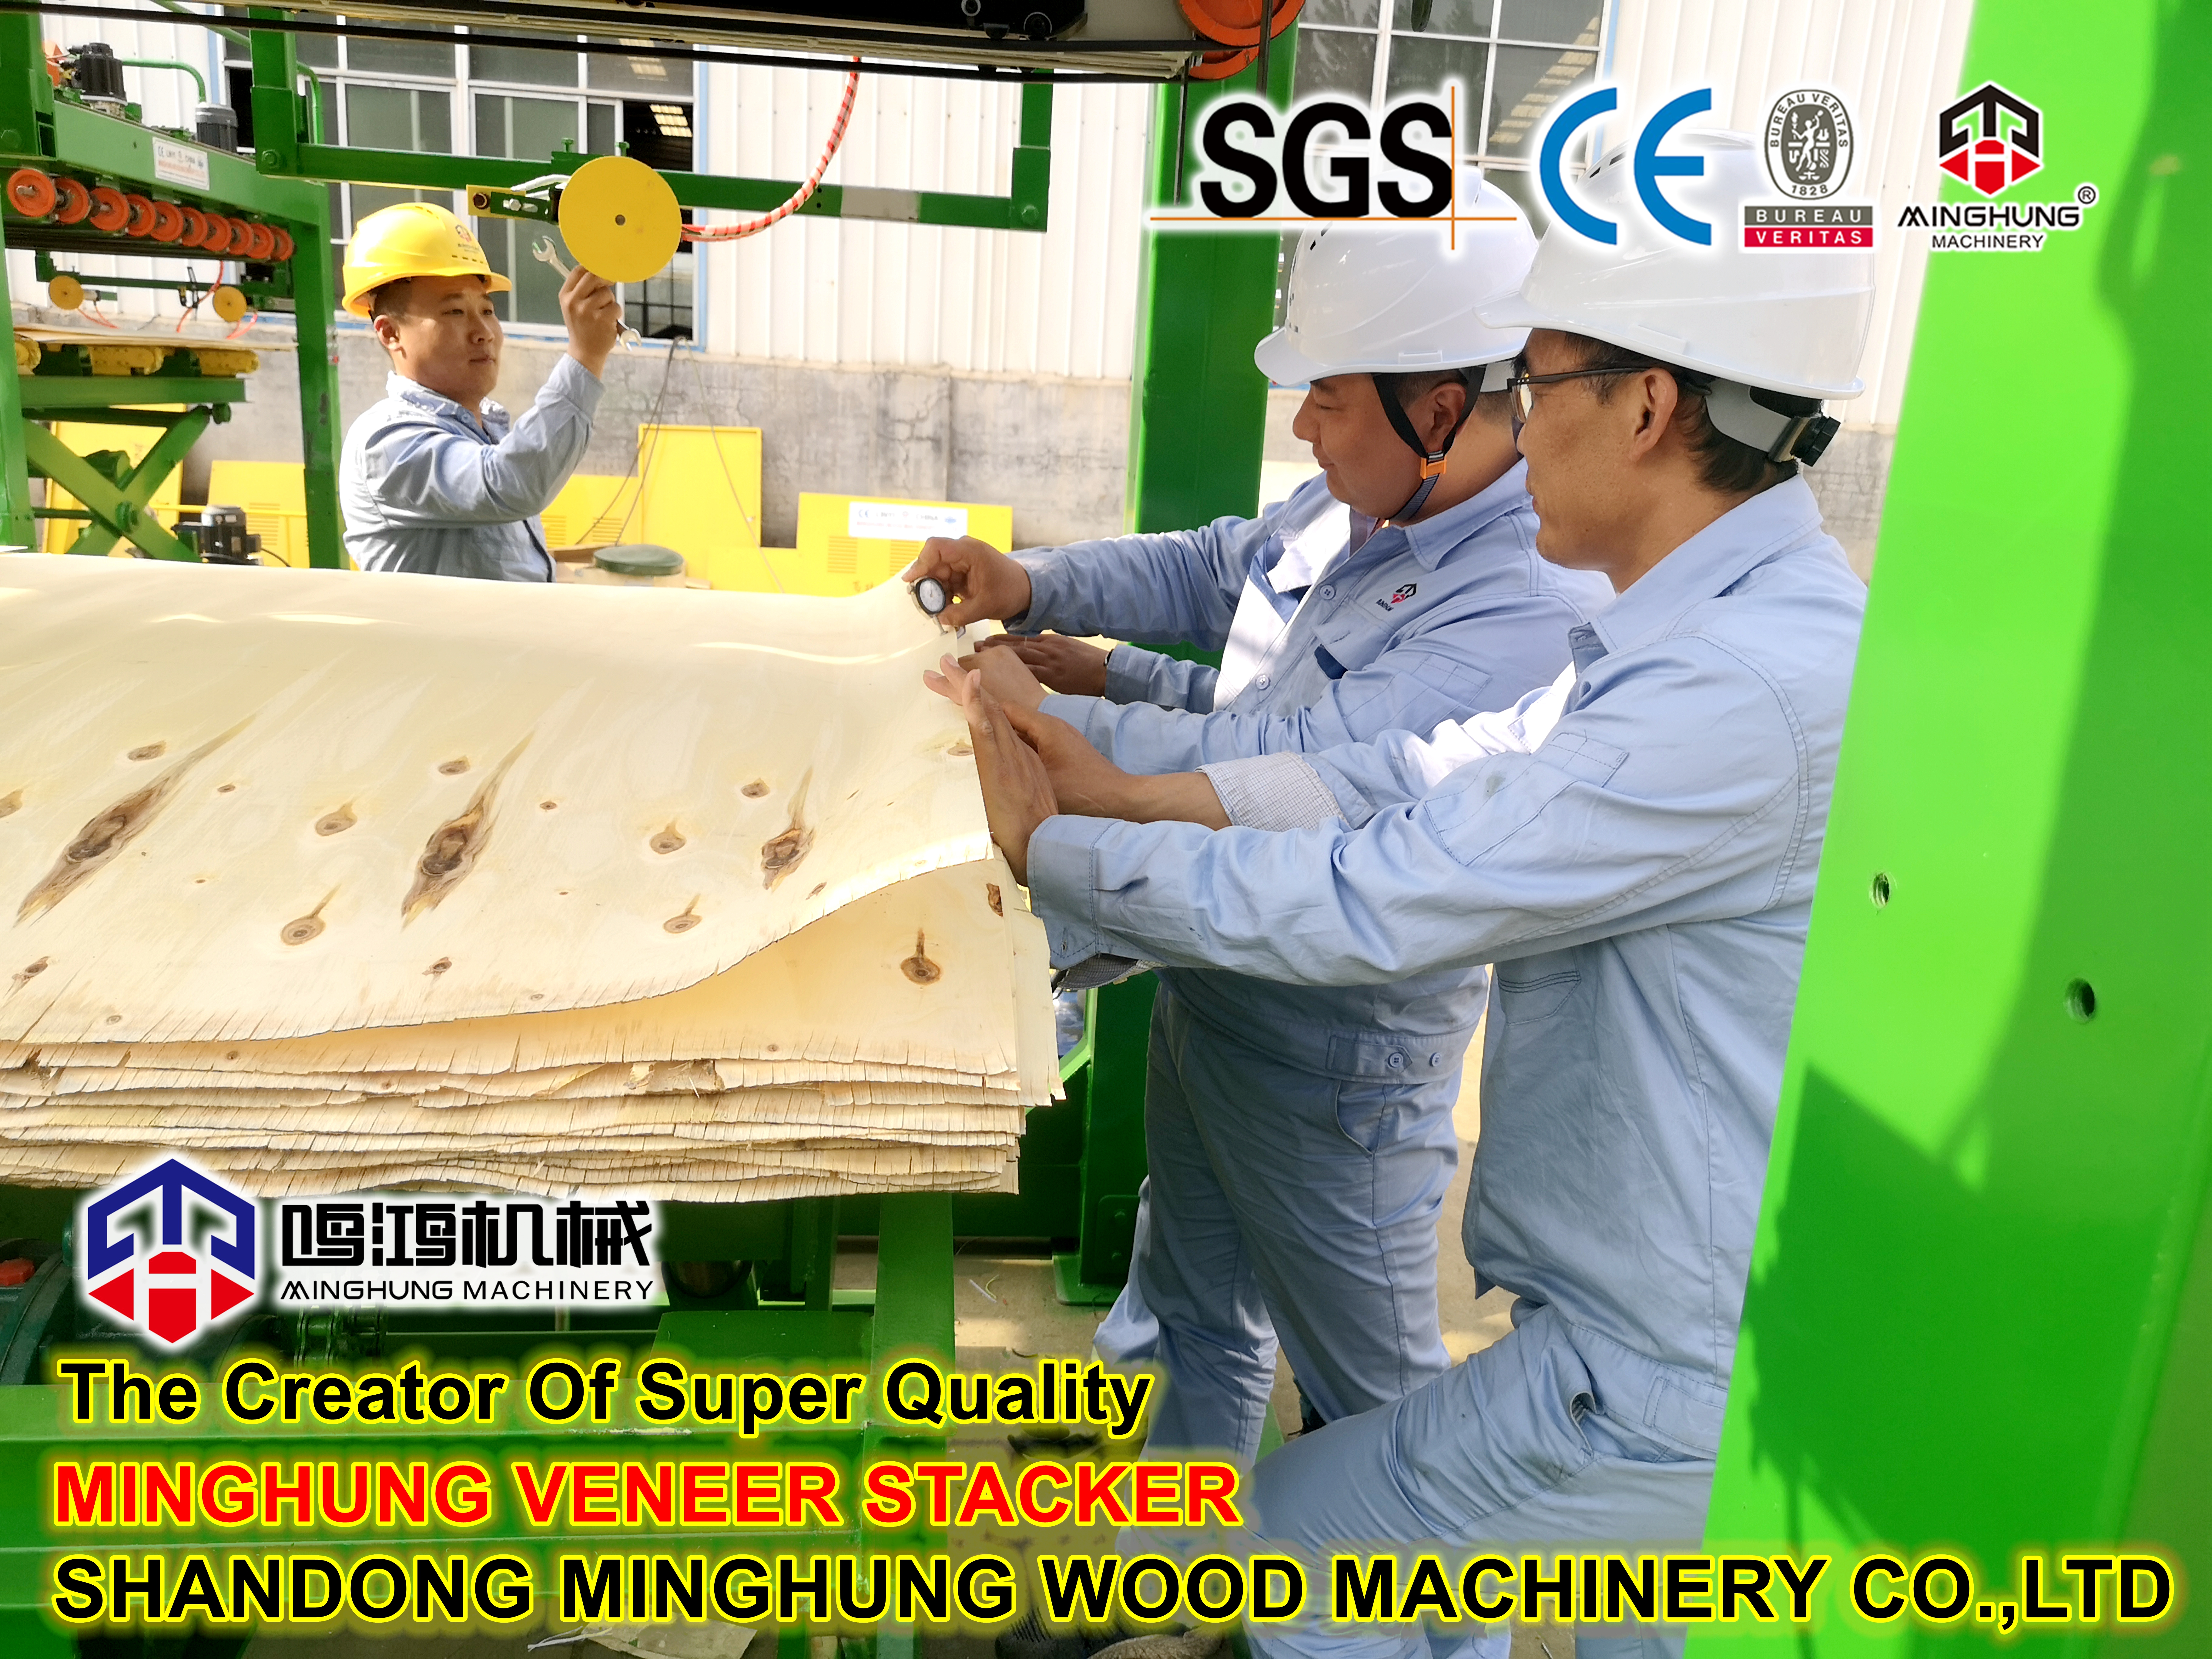 veneer stacker details From MINGHUNG MACHINERY